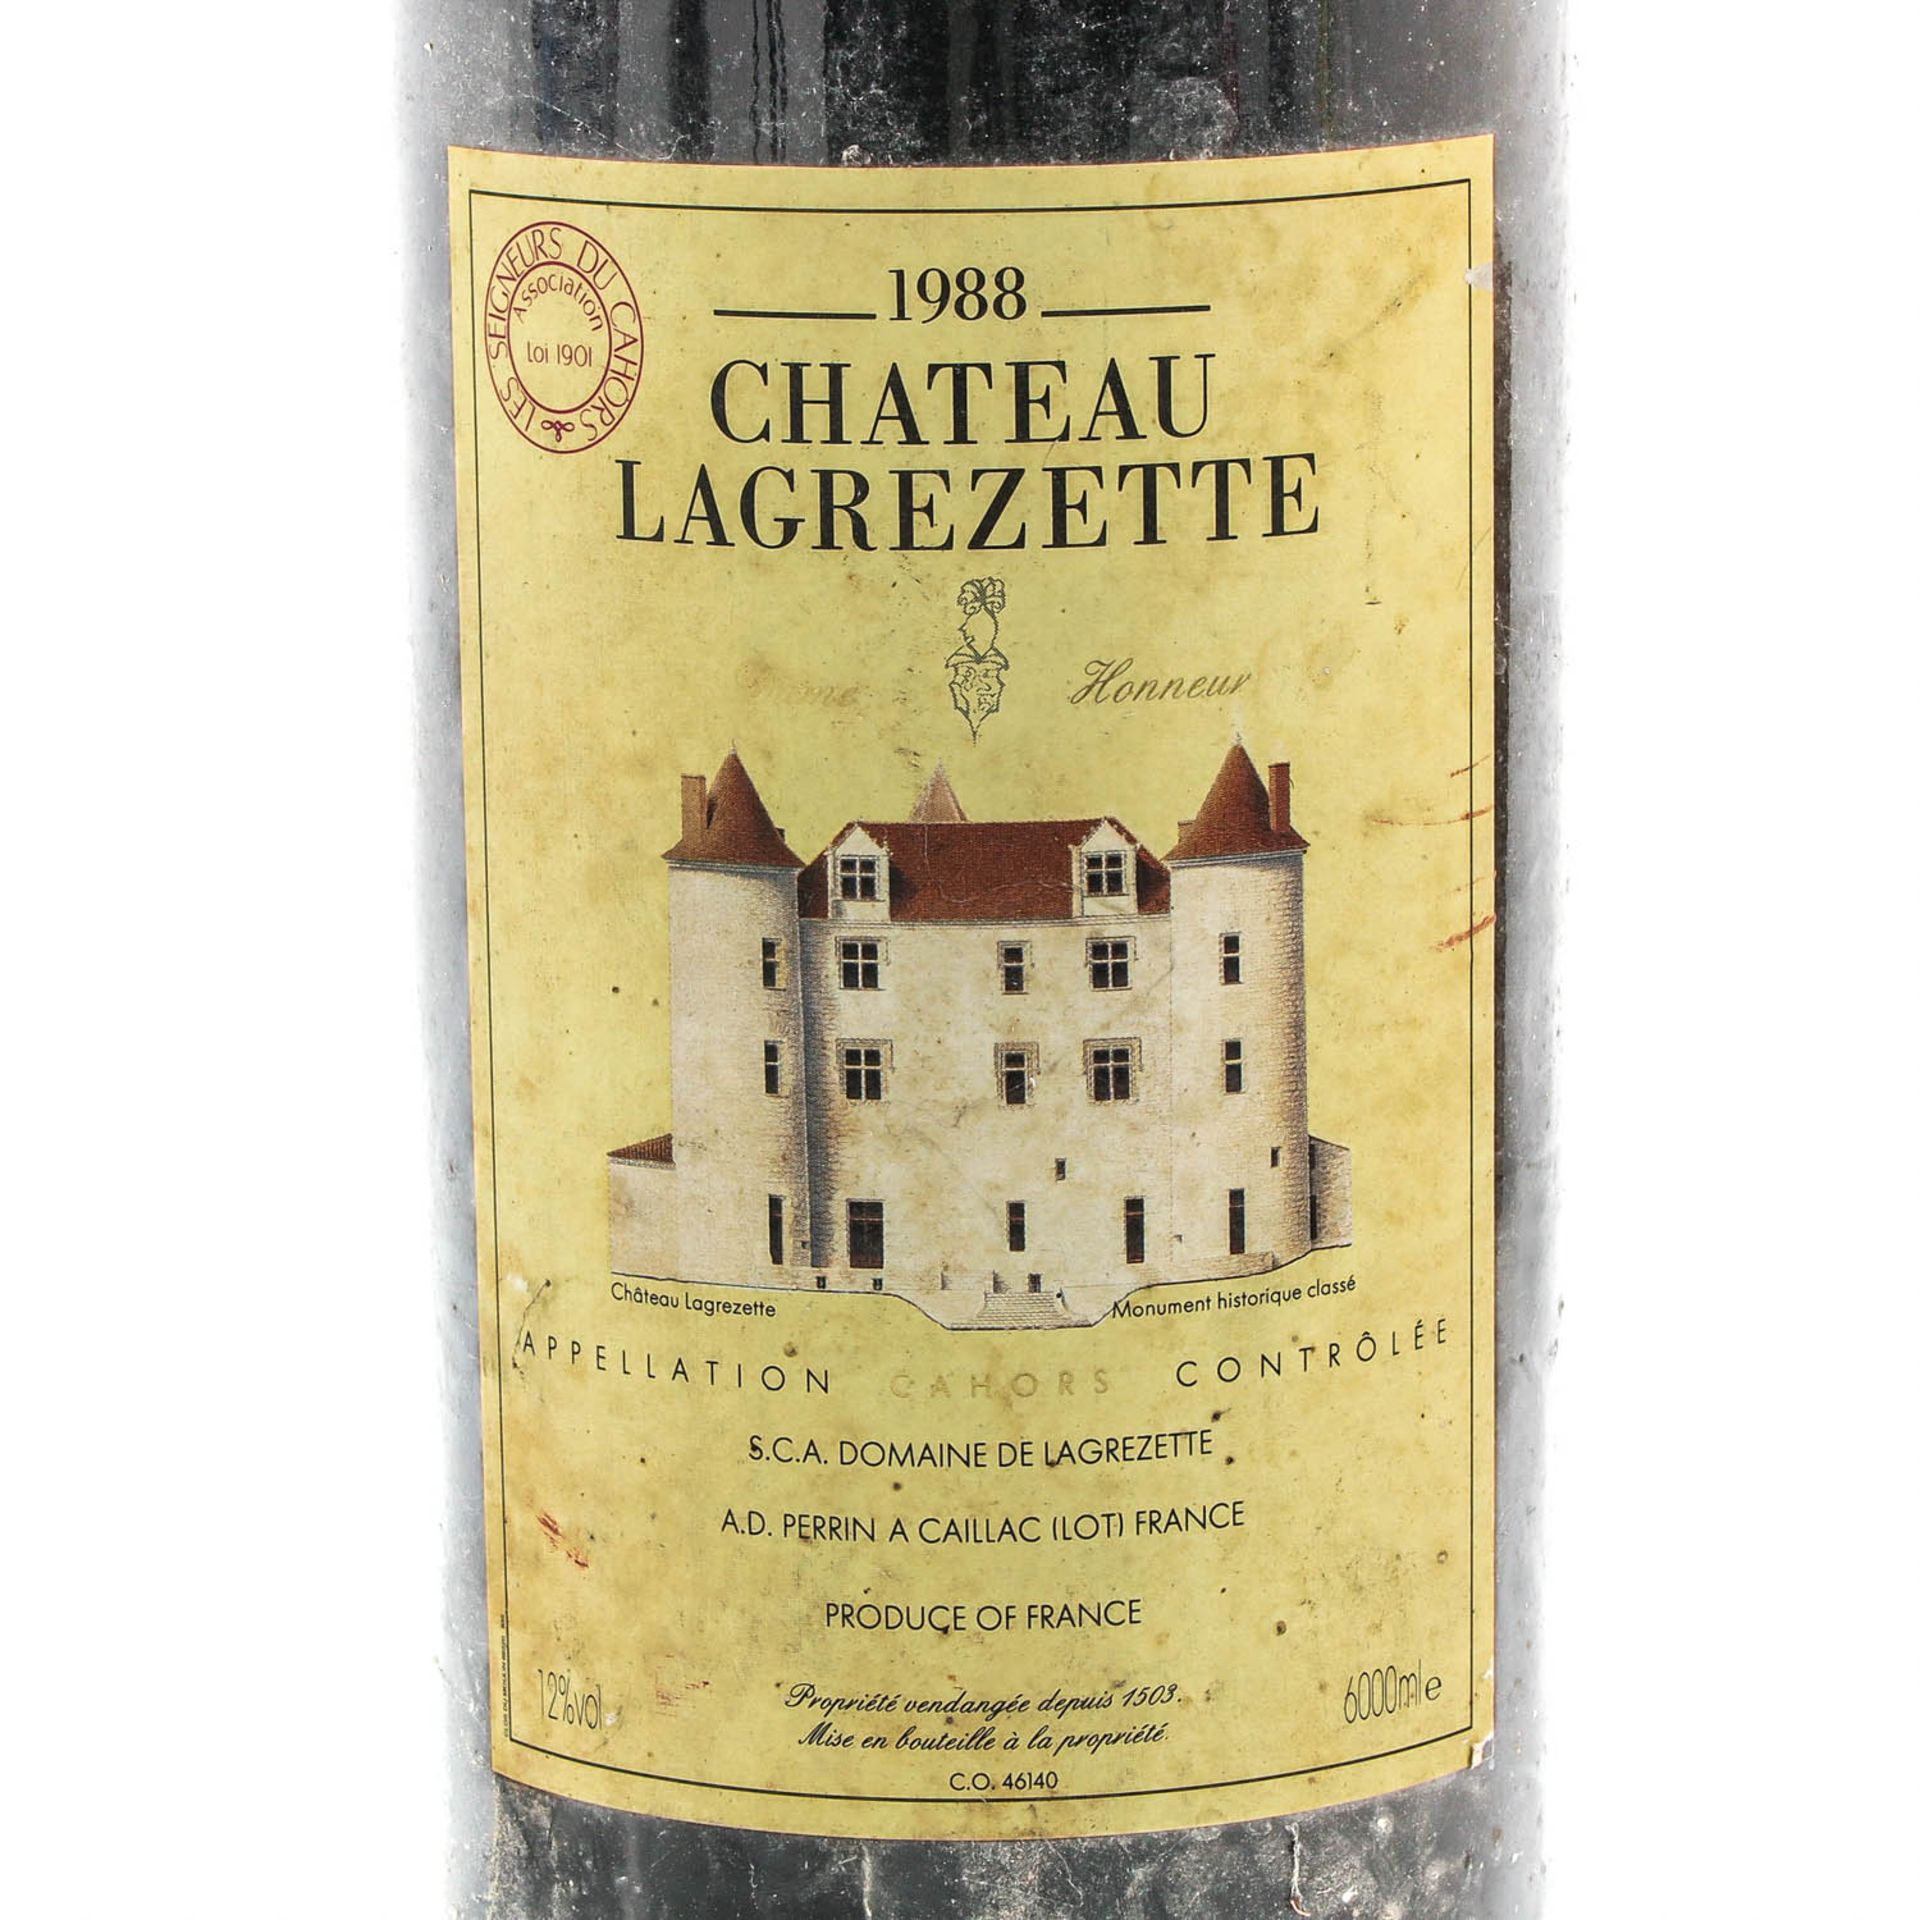 An Imperial of Chateau Lagrezette 1988 - Image 3 of 4